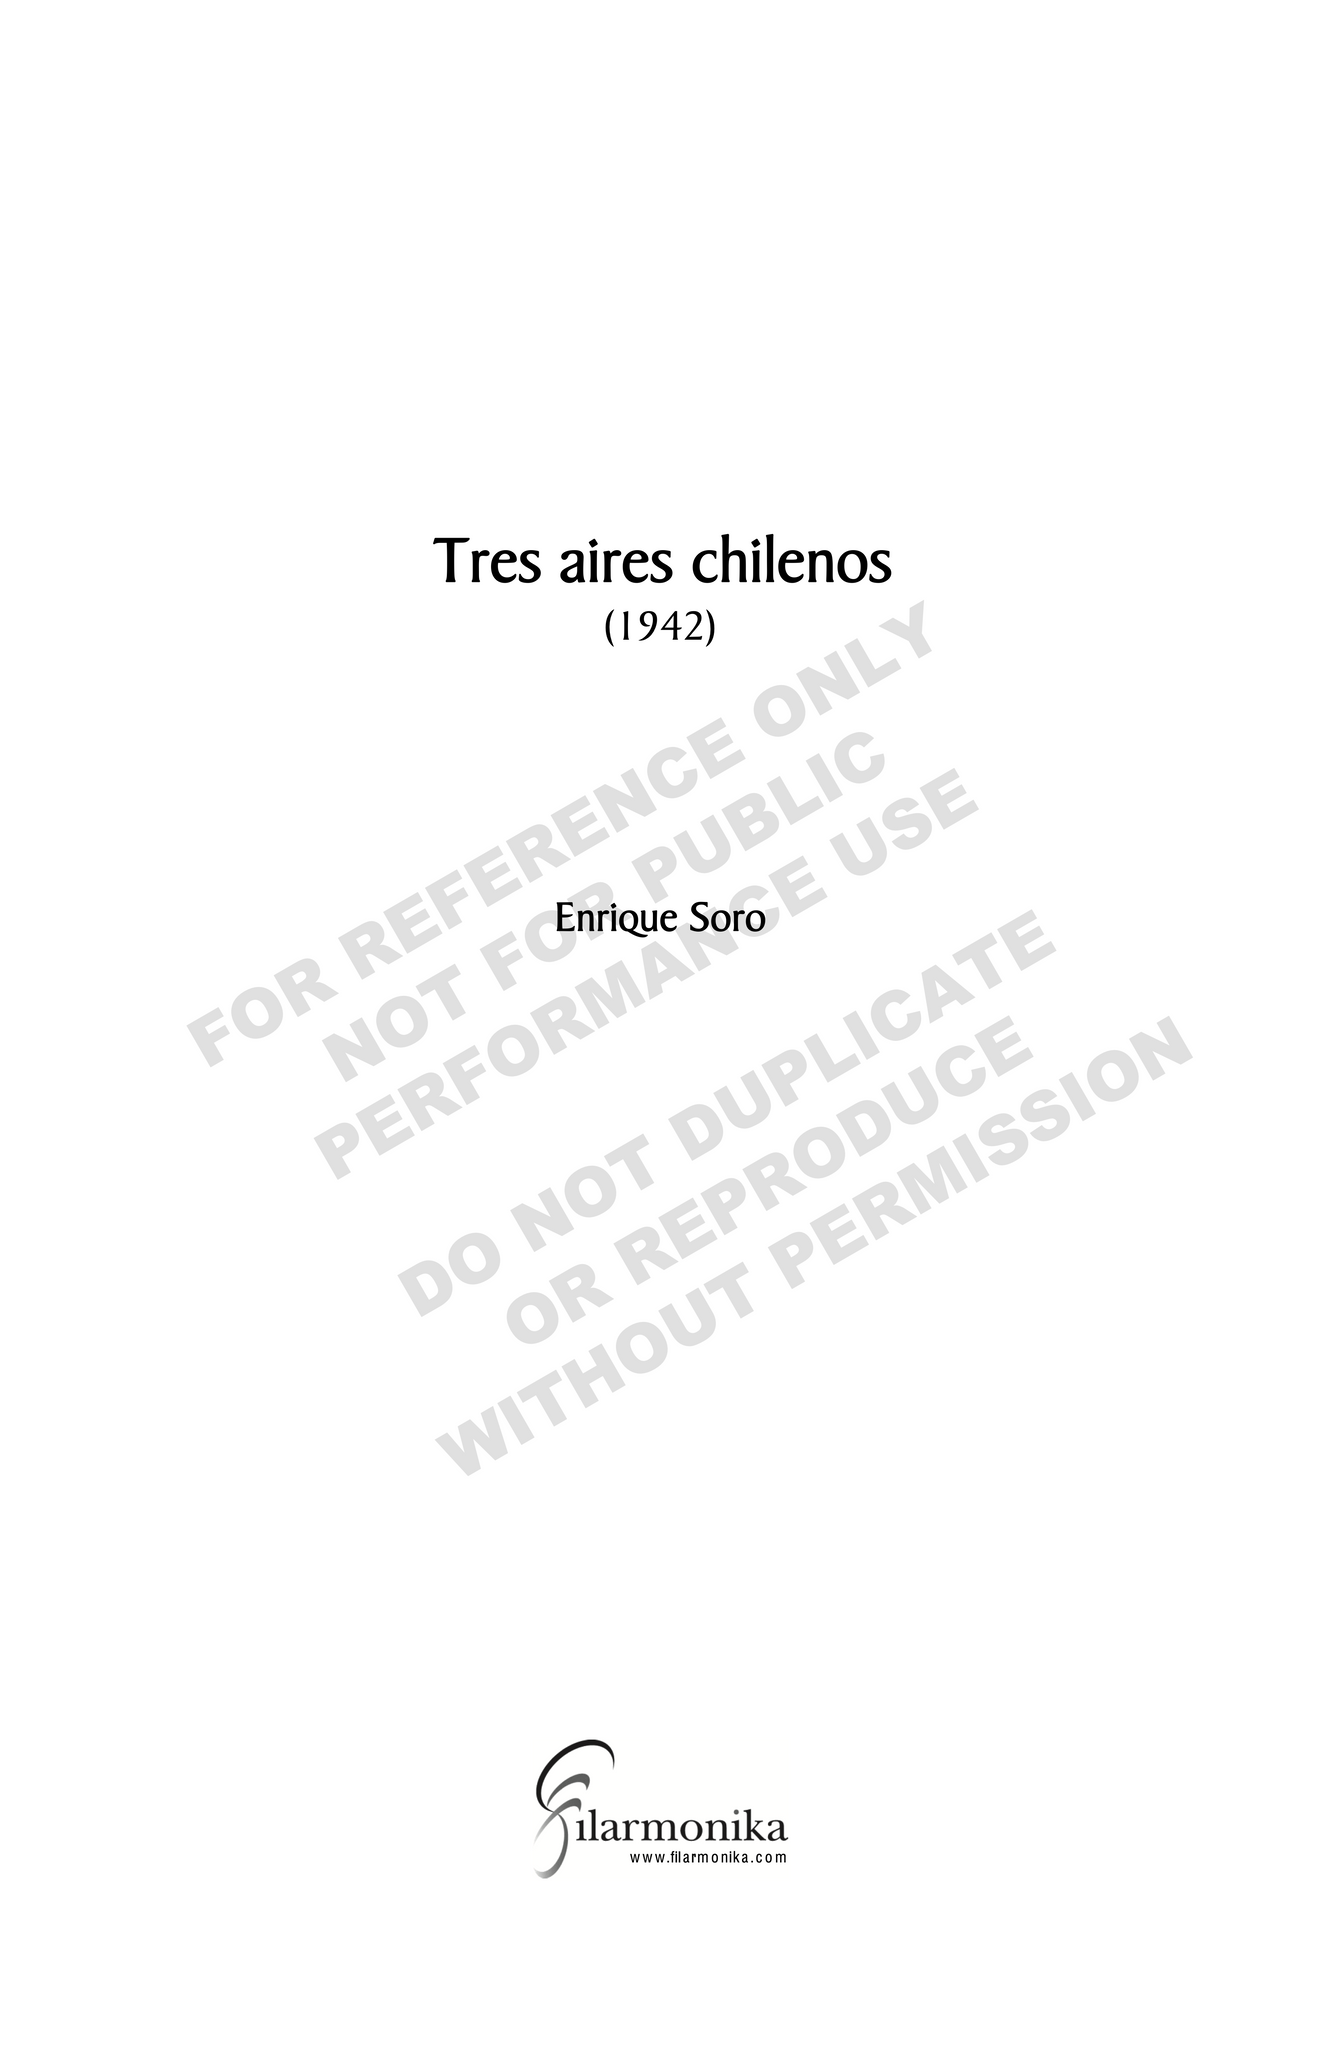 Tres aires chilenos, for orchestra